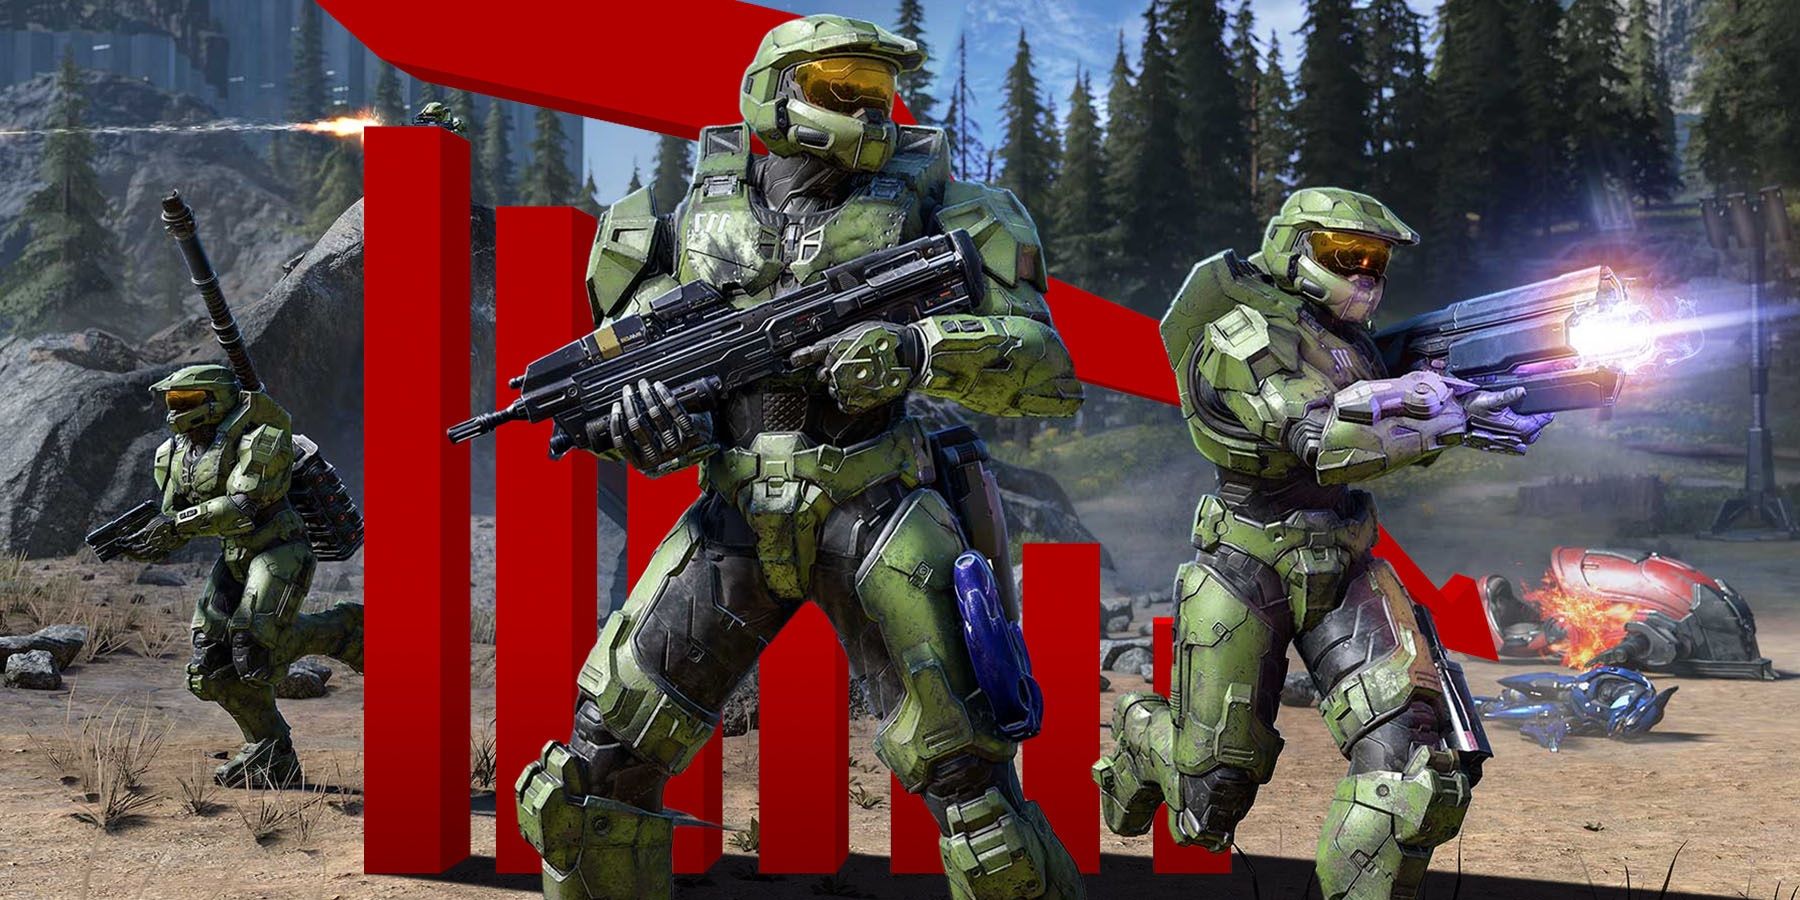 Steam data shows almost no one plays Halo Infinite anymore - Neowin